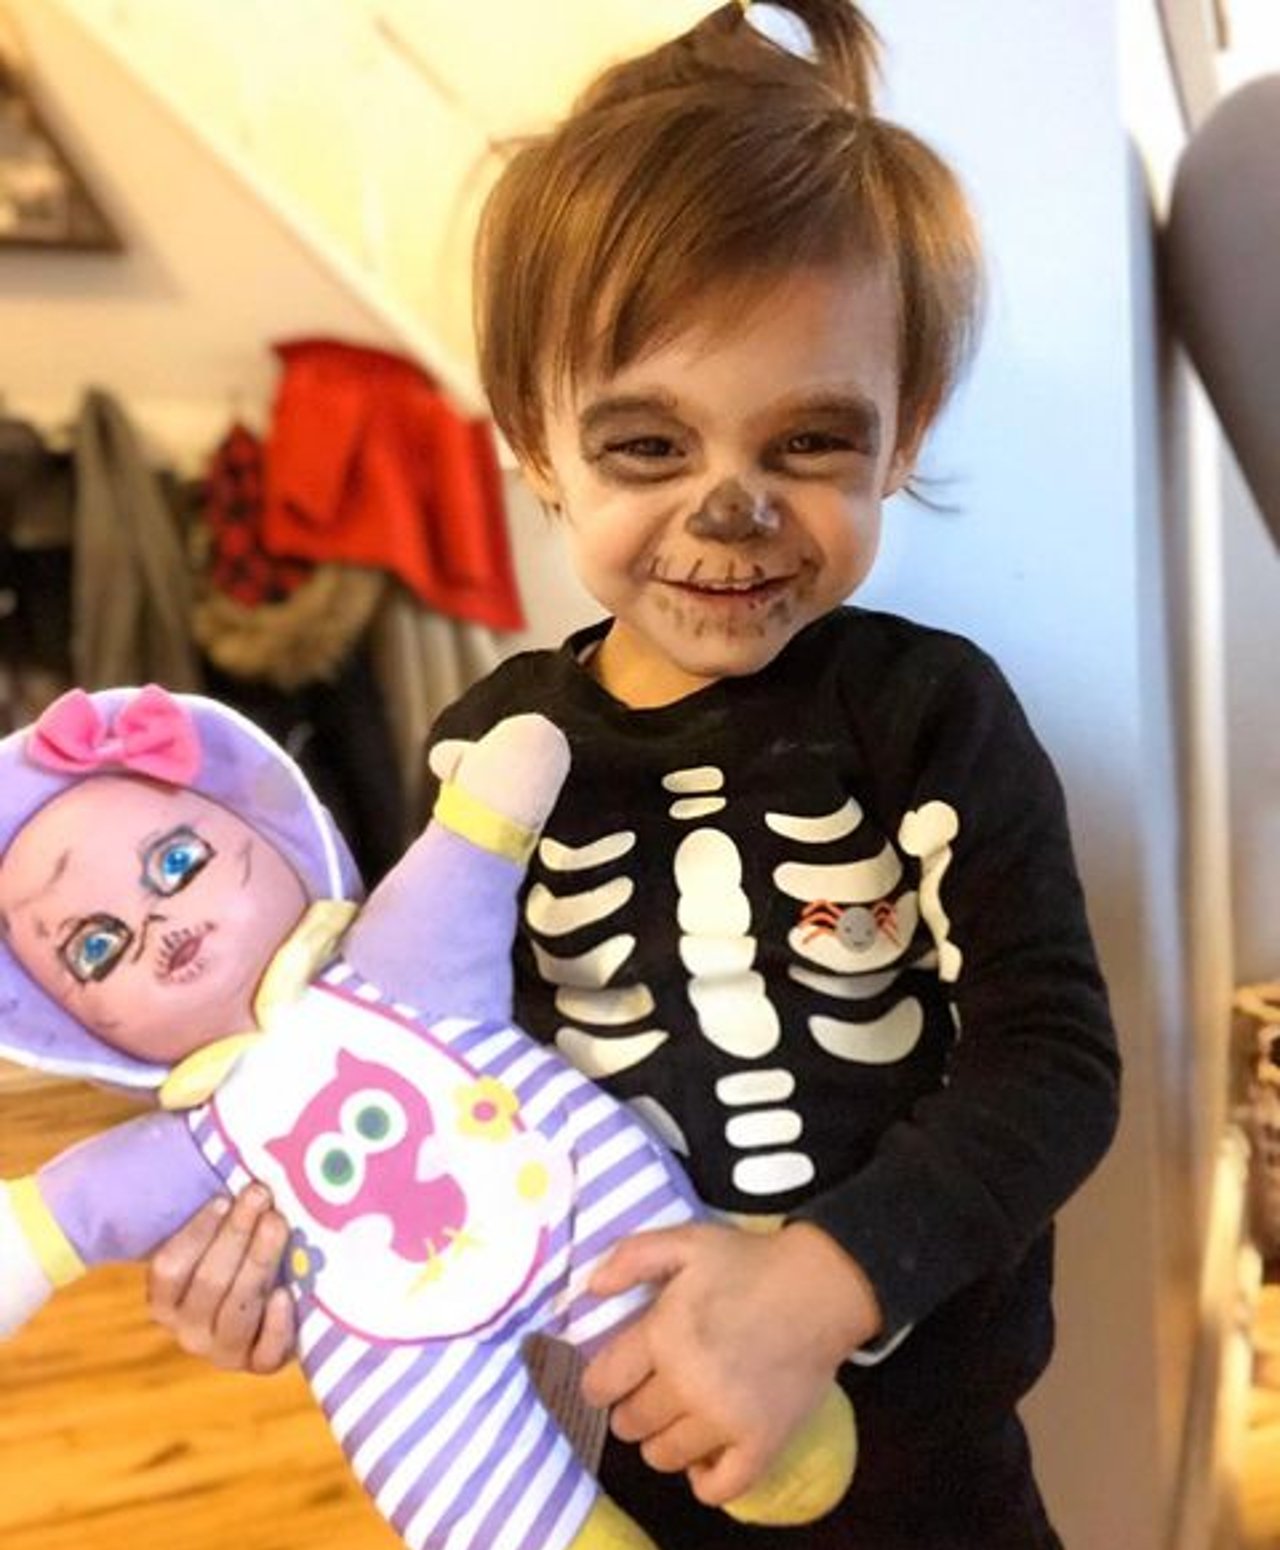 A picture of Noe holding a doll while dressing up as a skeleton.